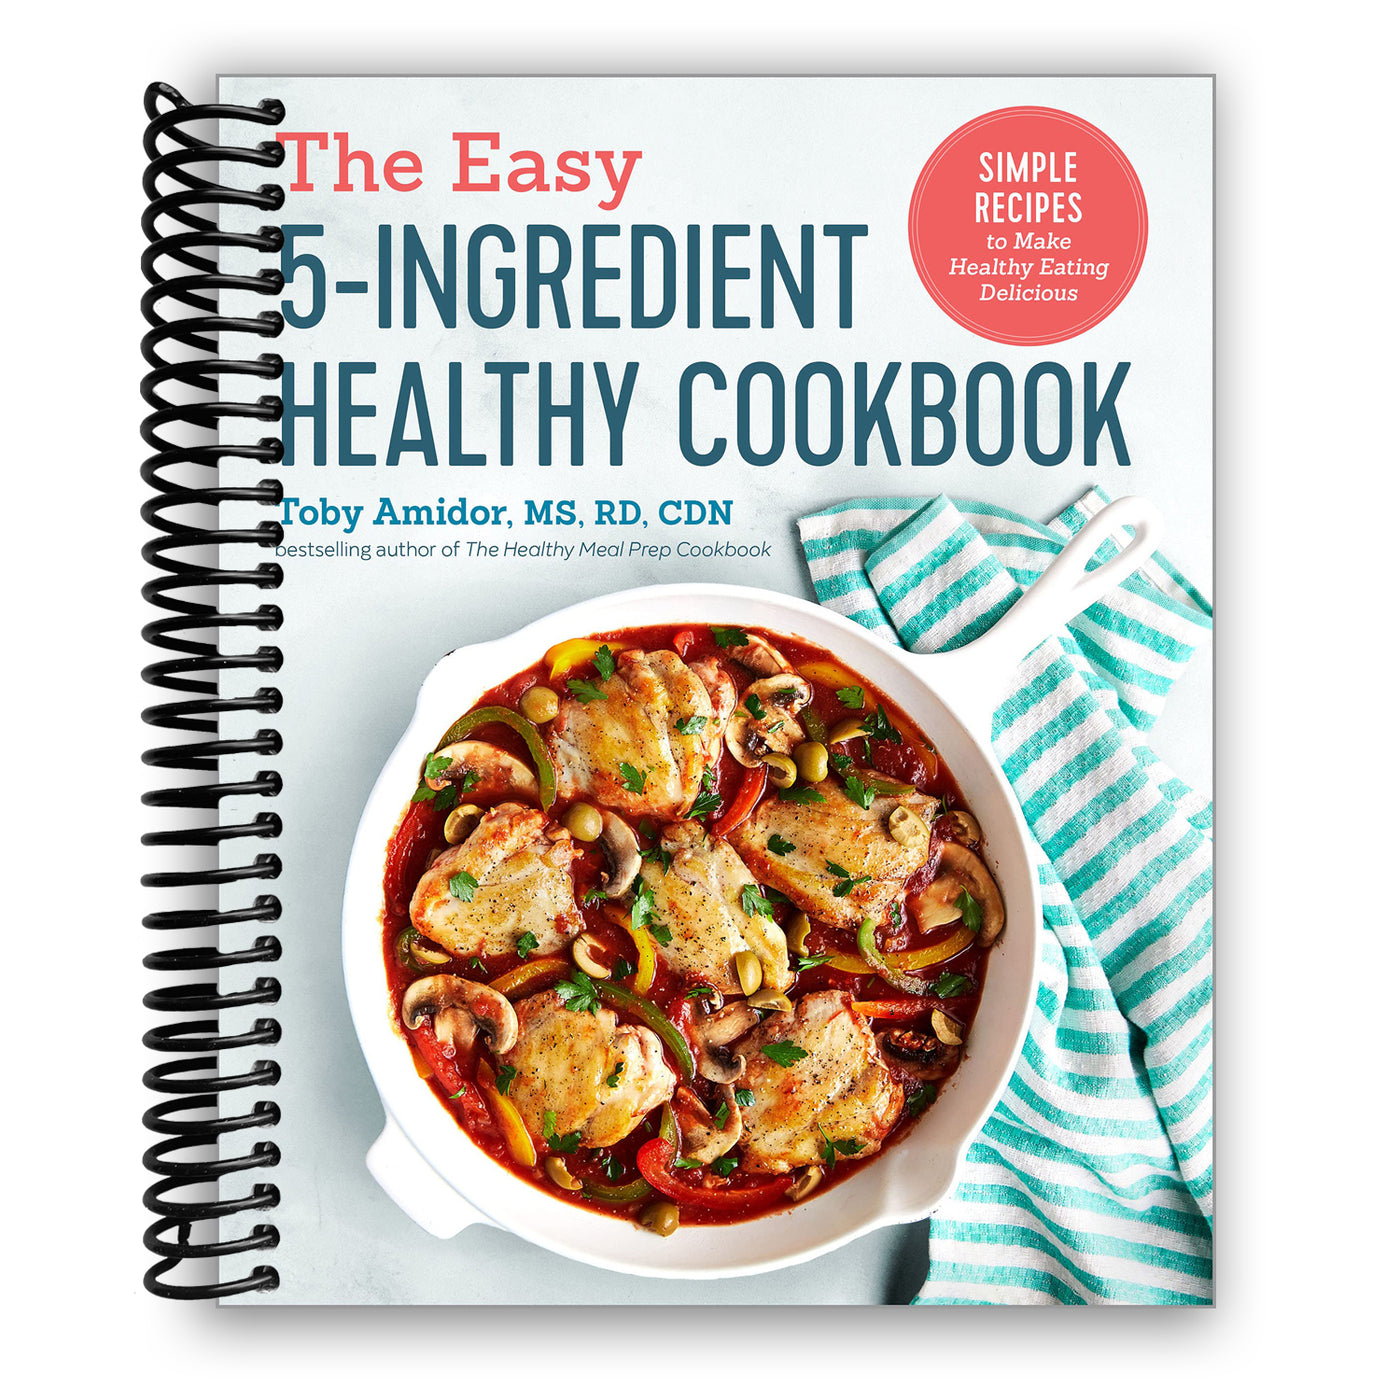 The Easy 5-Ingredient Healthy Cookbook: Simple Recipes to Make Healthy Eating Delicious (Spiral Bound)